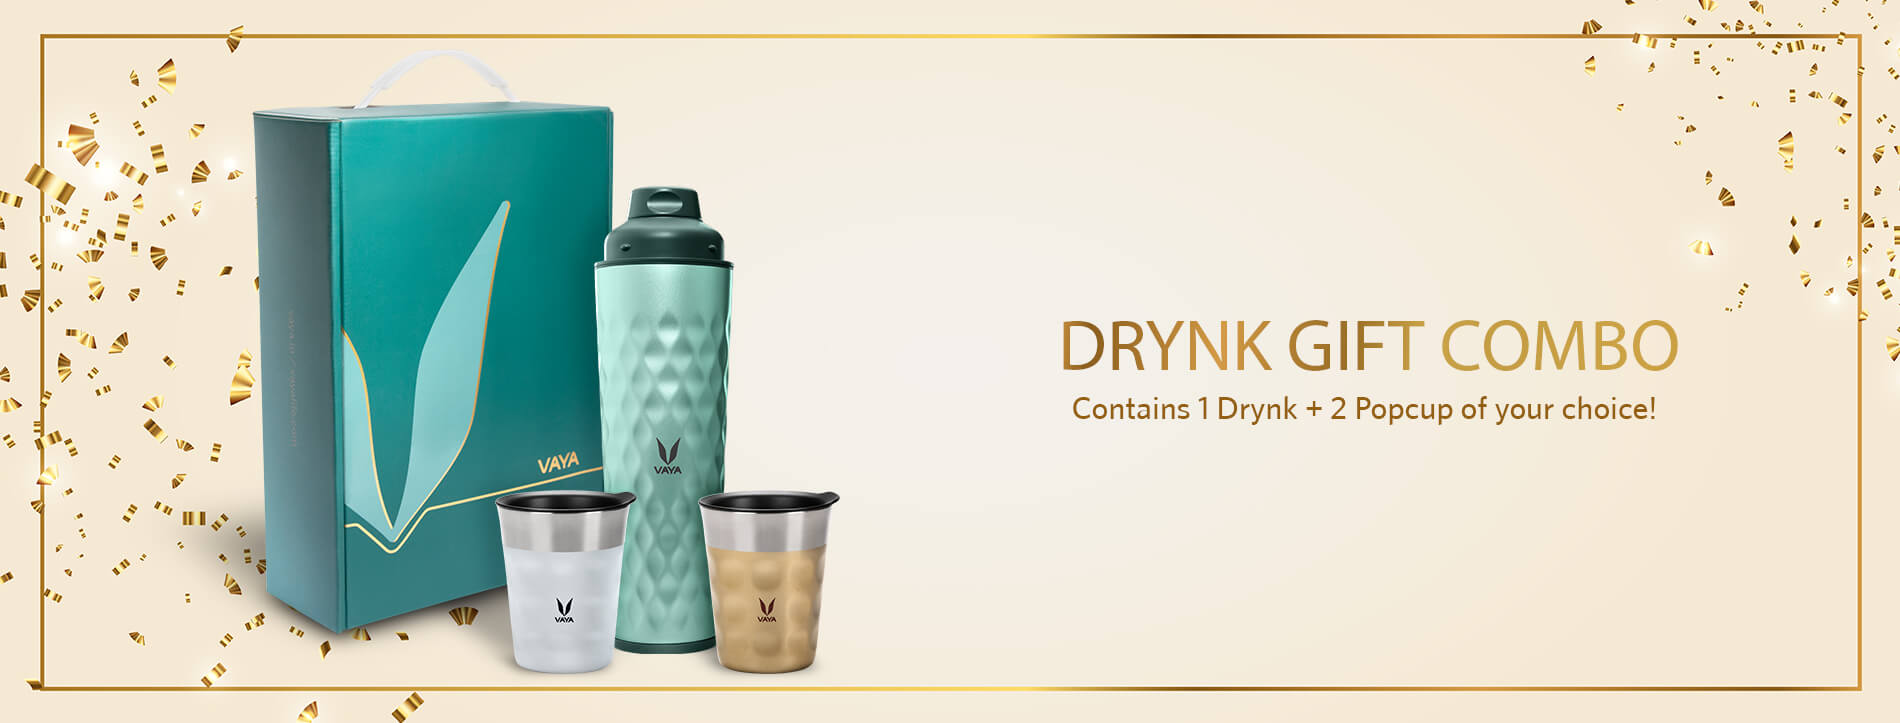 Drink Gift Combo Banner